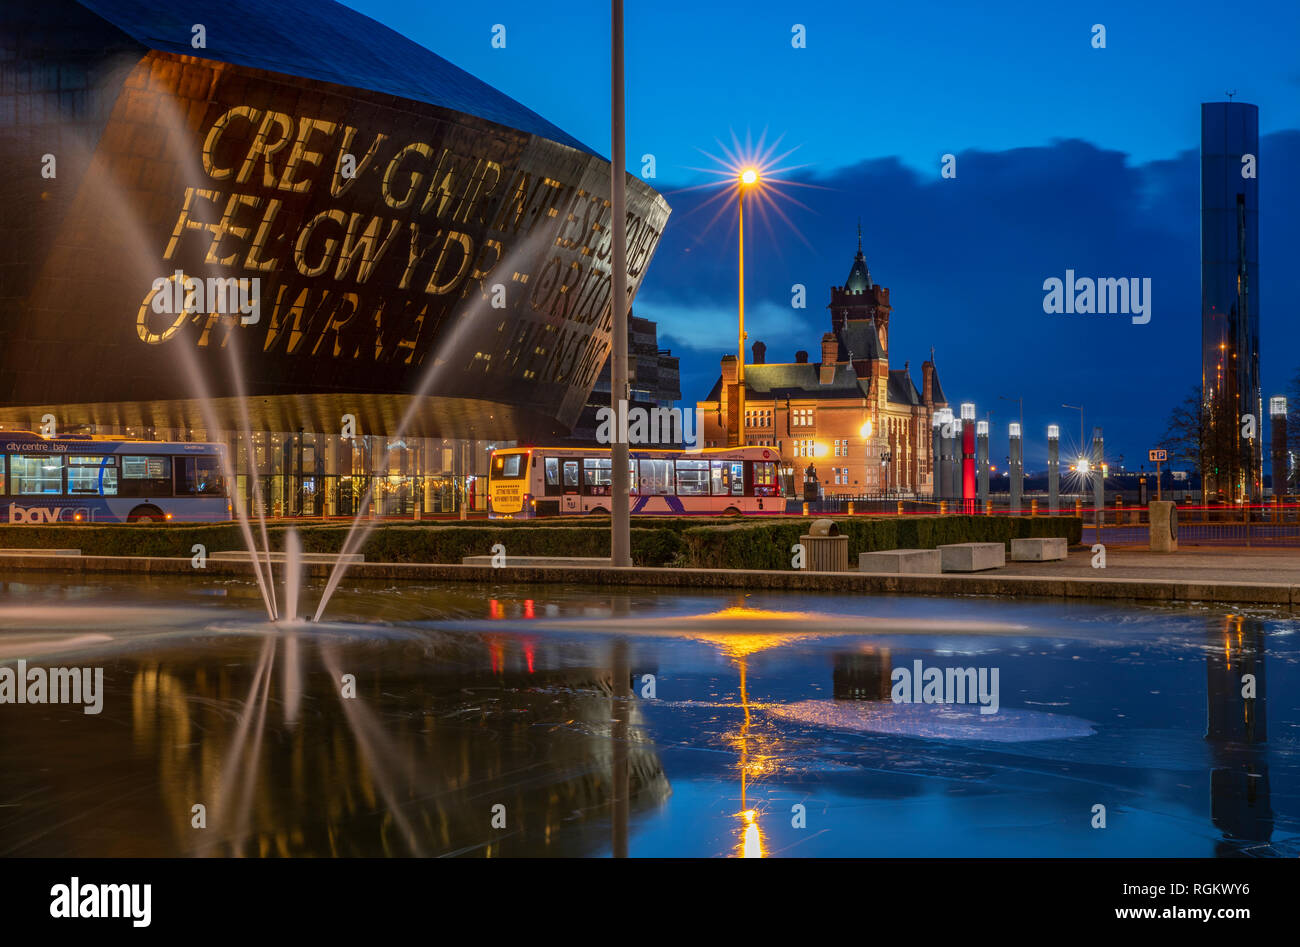 The wales Millennium Centre, Pierhead Building, Water Tower and the Flourish Fountain, Cardiff Bay, Wales Stock Photo